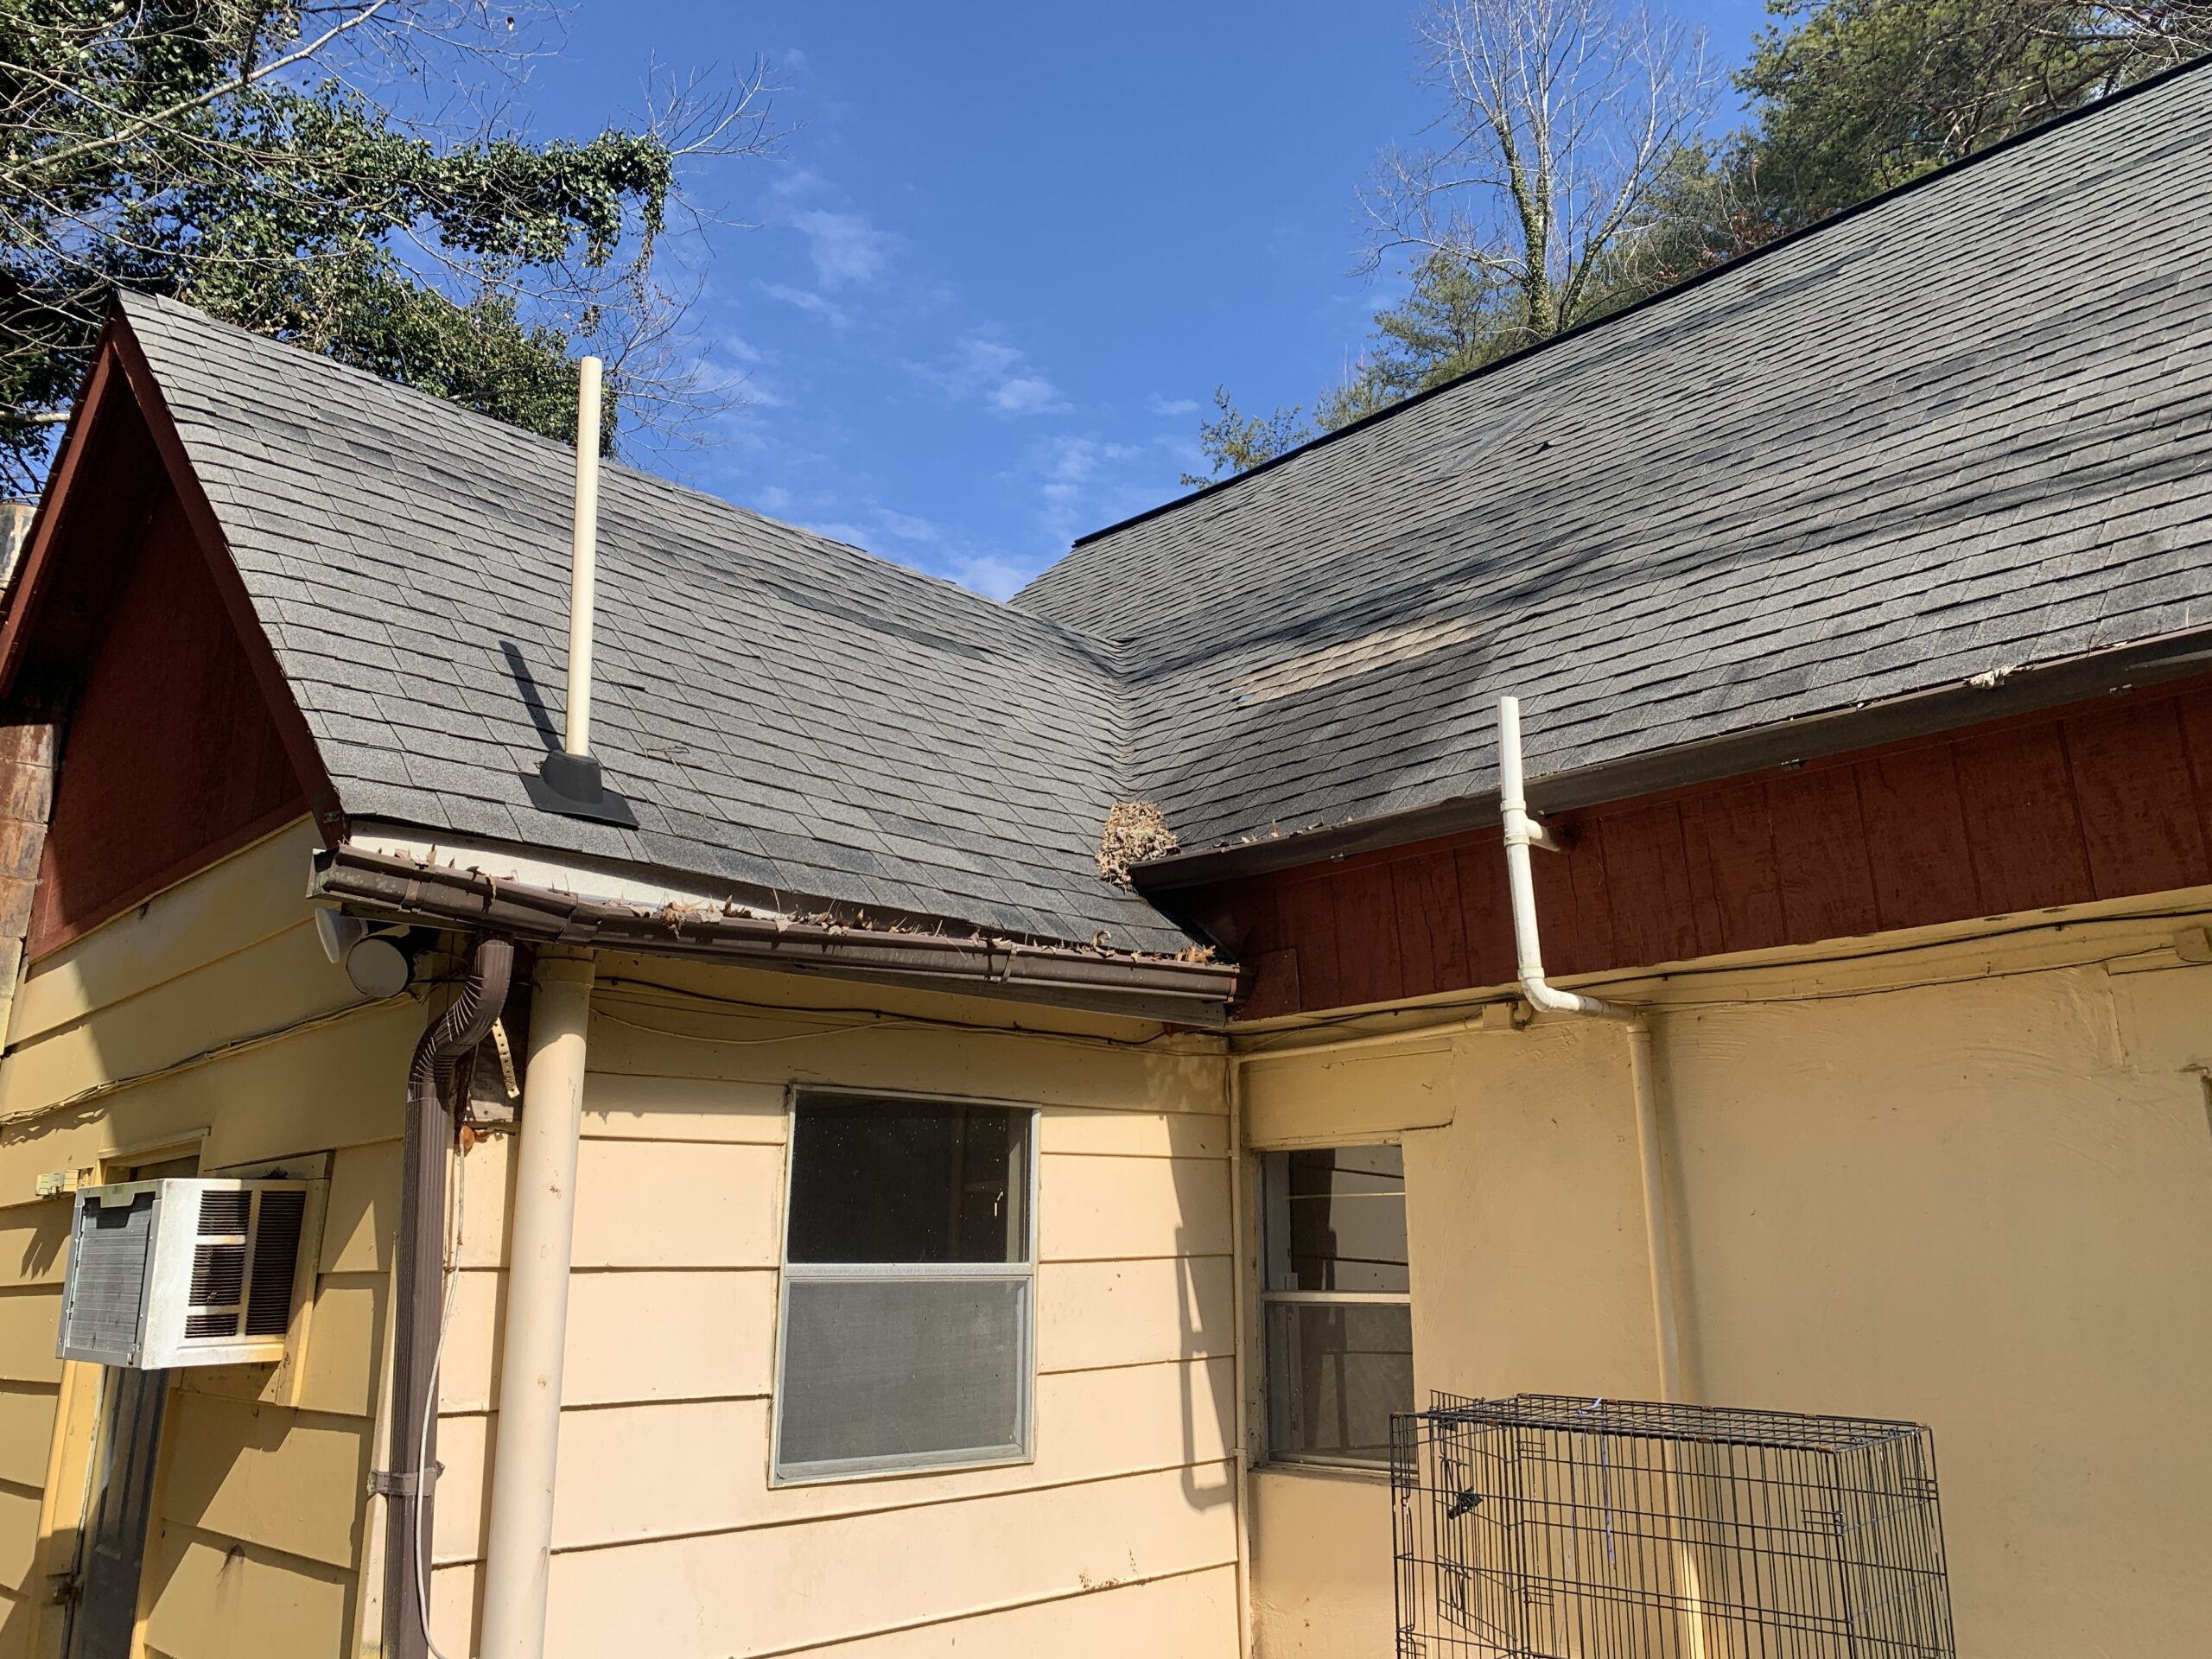 Some areas of this architectural shingle roof have been visibly repaired or replaced